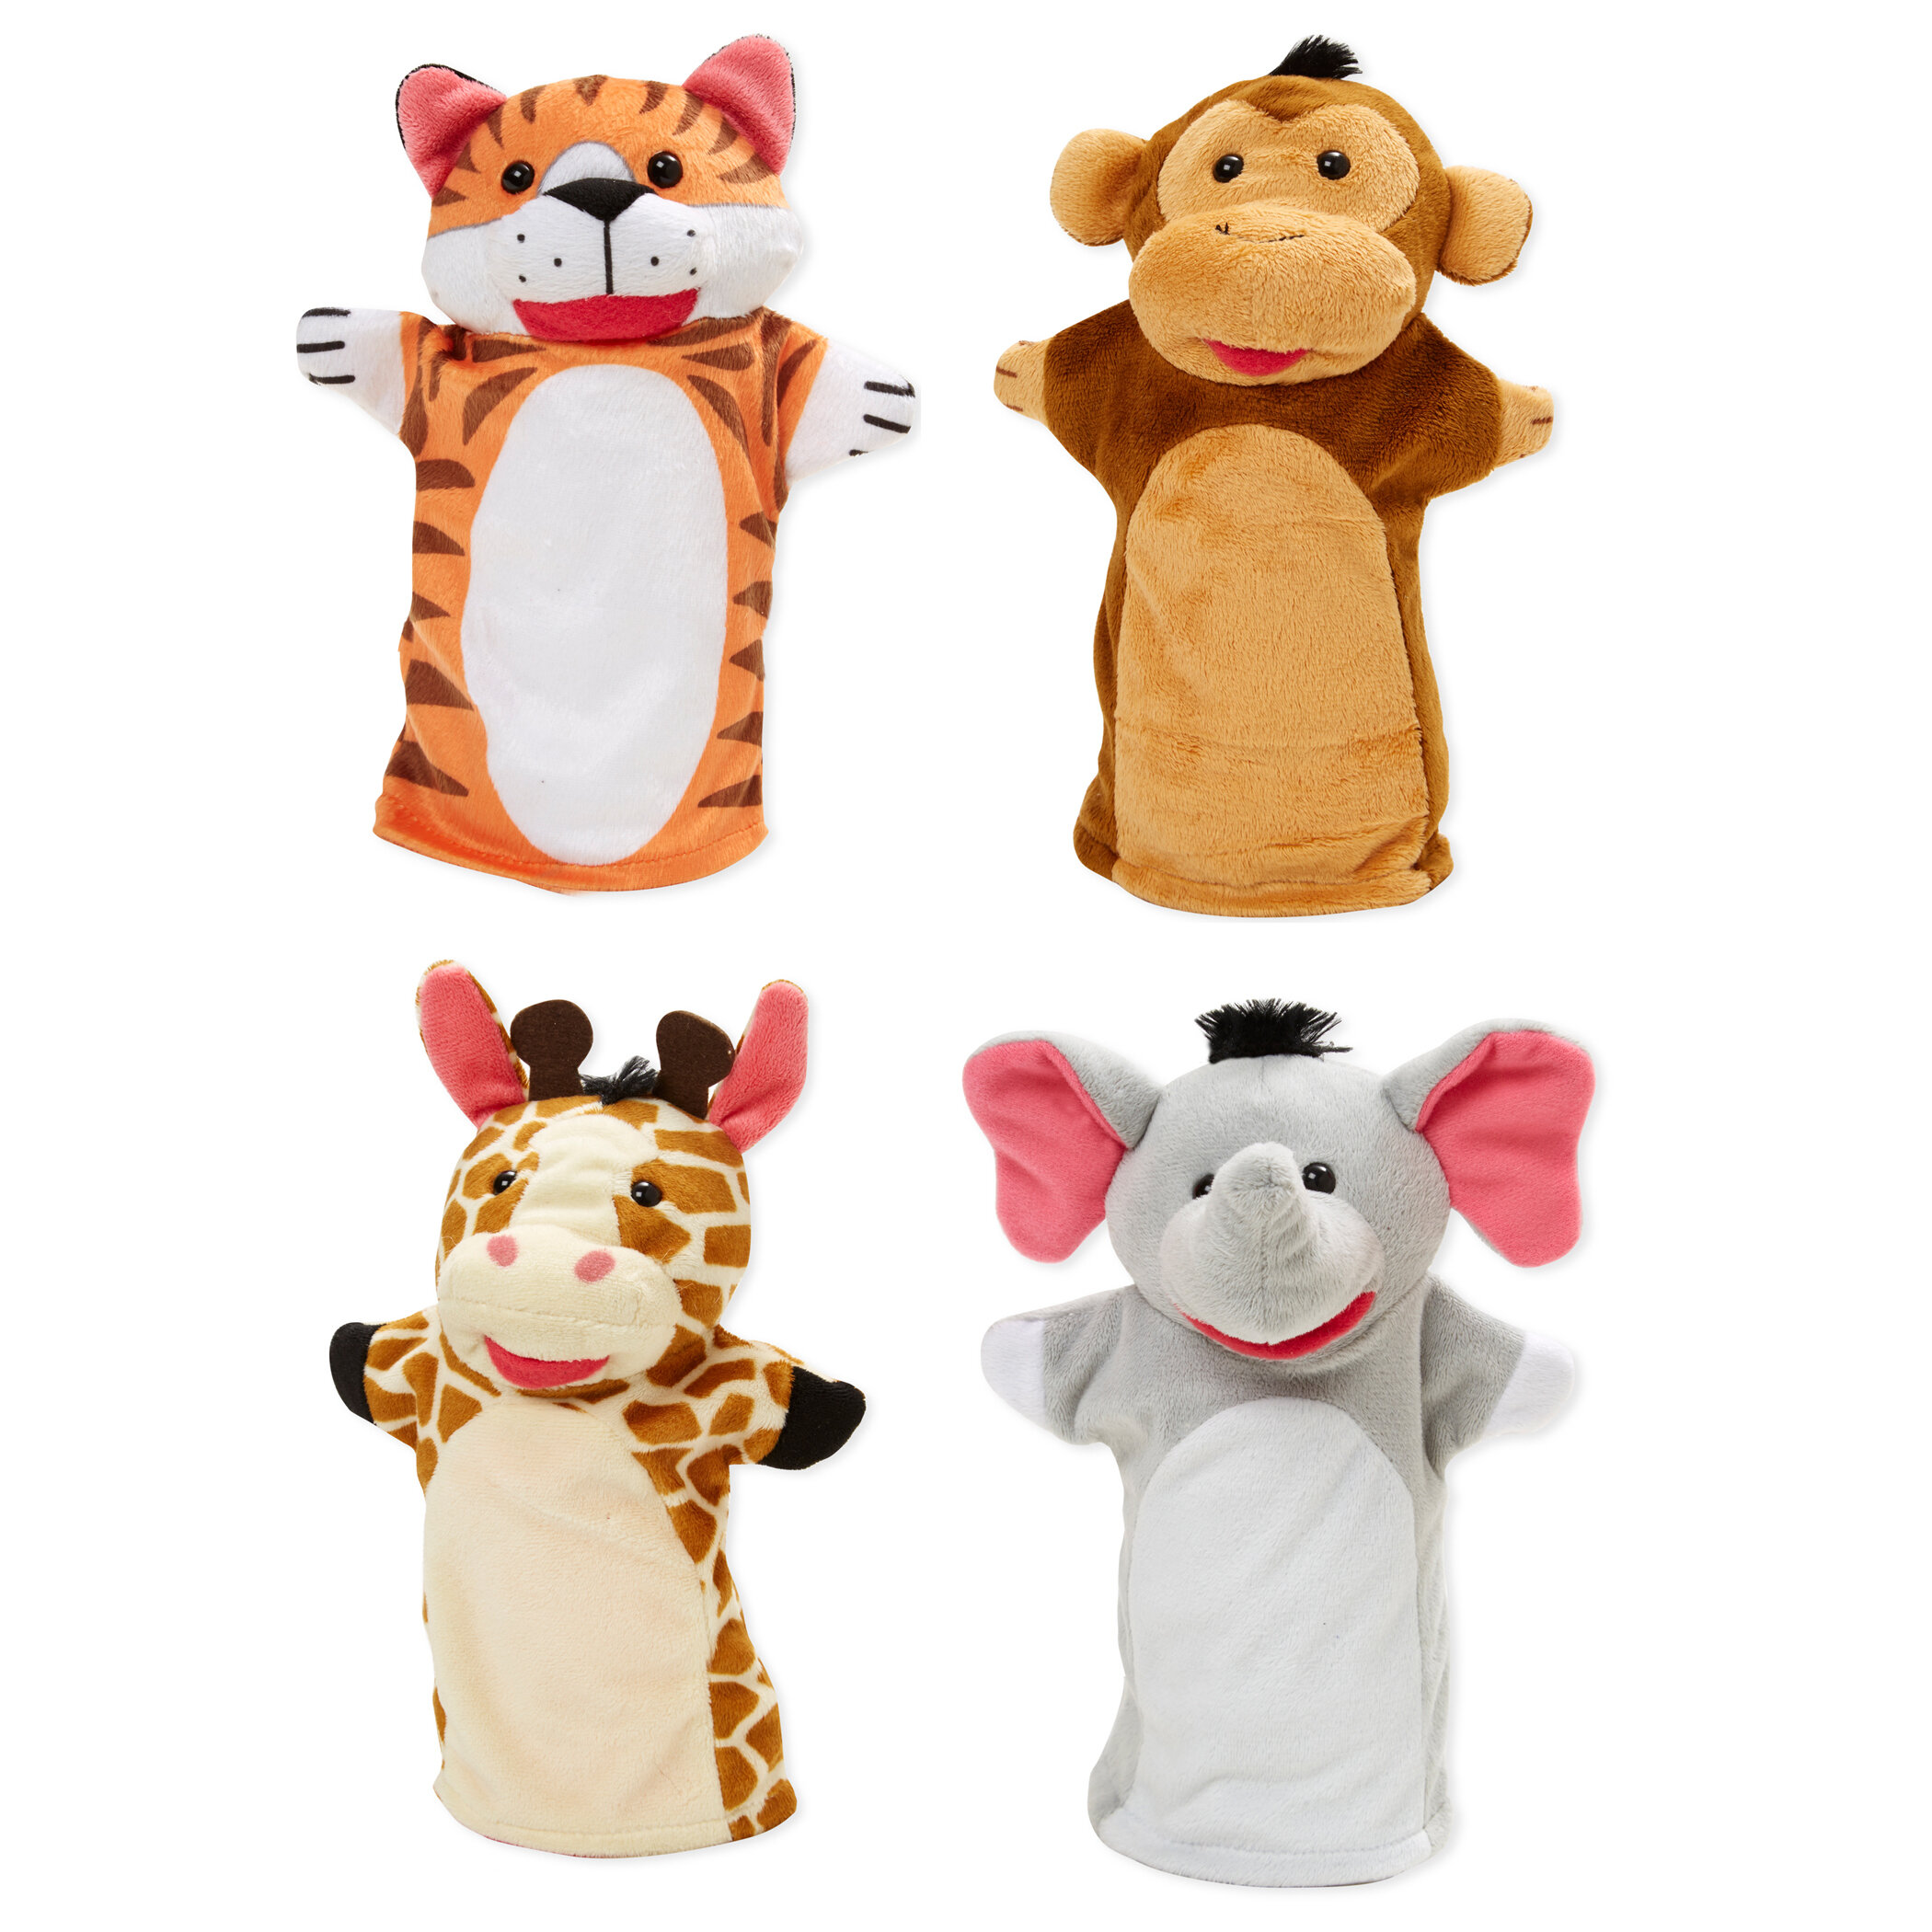 Melissa & Doug 9081 Zoo Friends Hand Puppets for sale online 